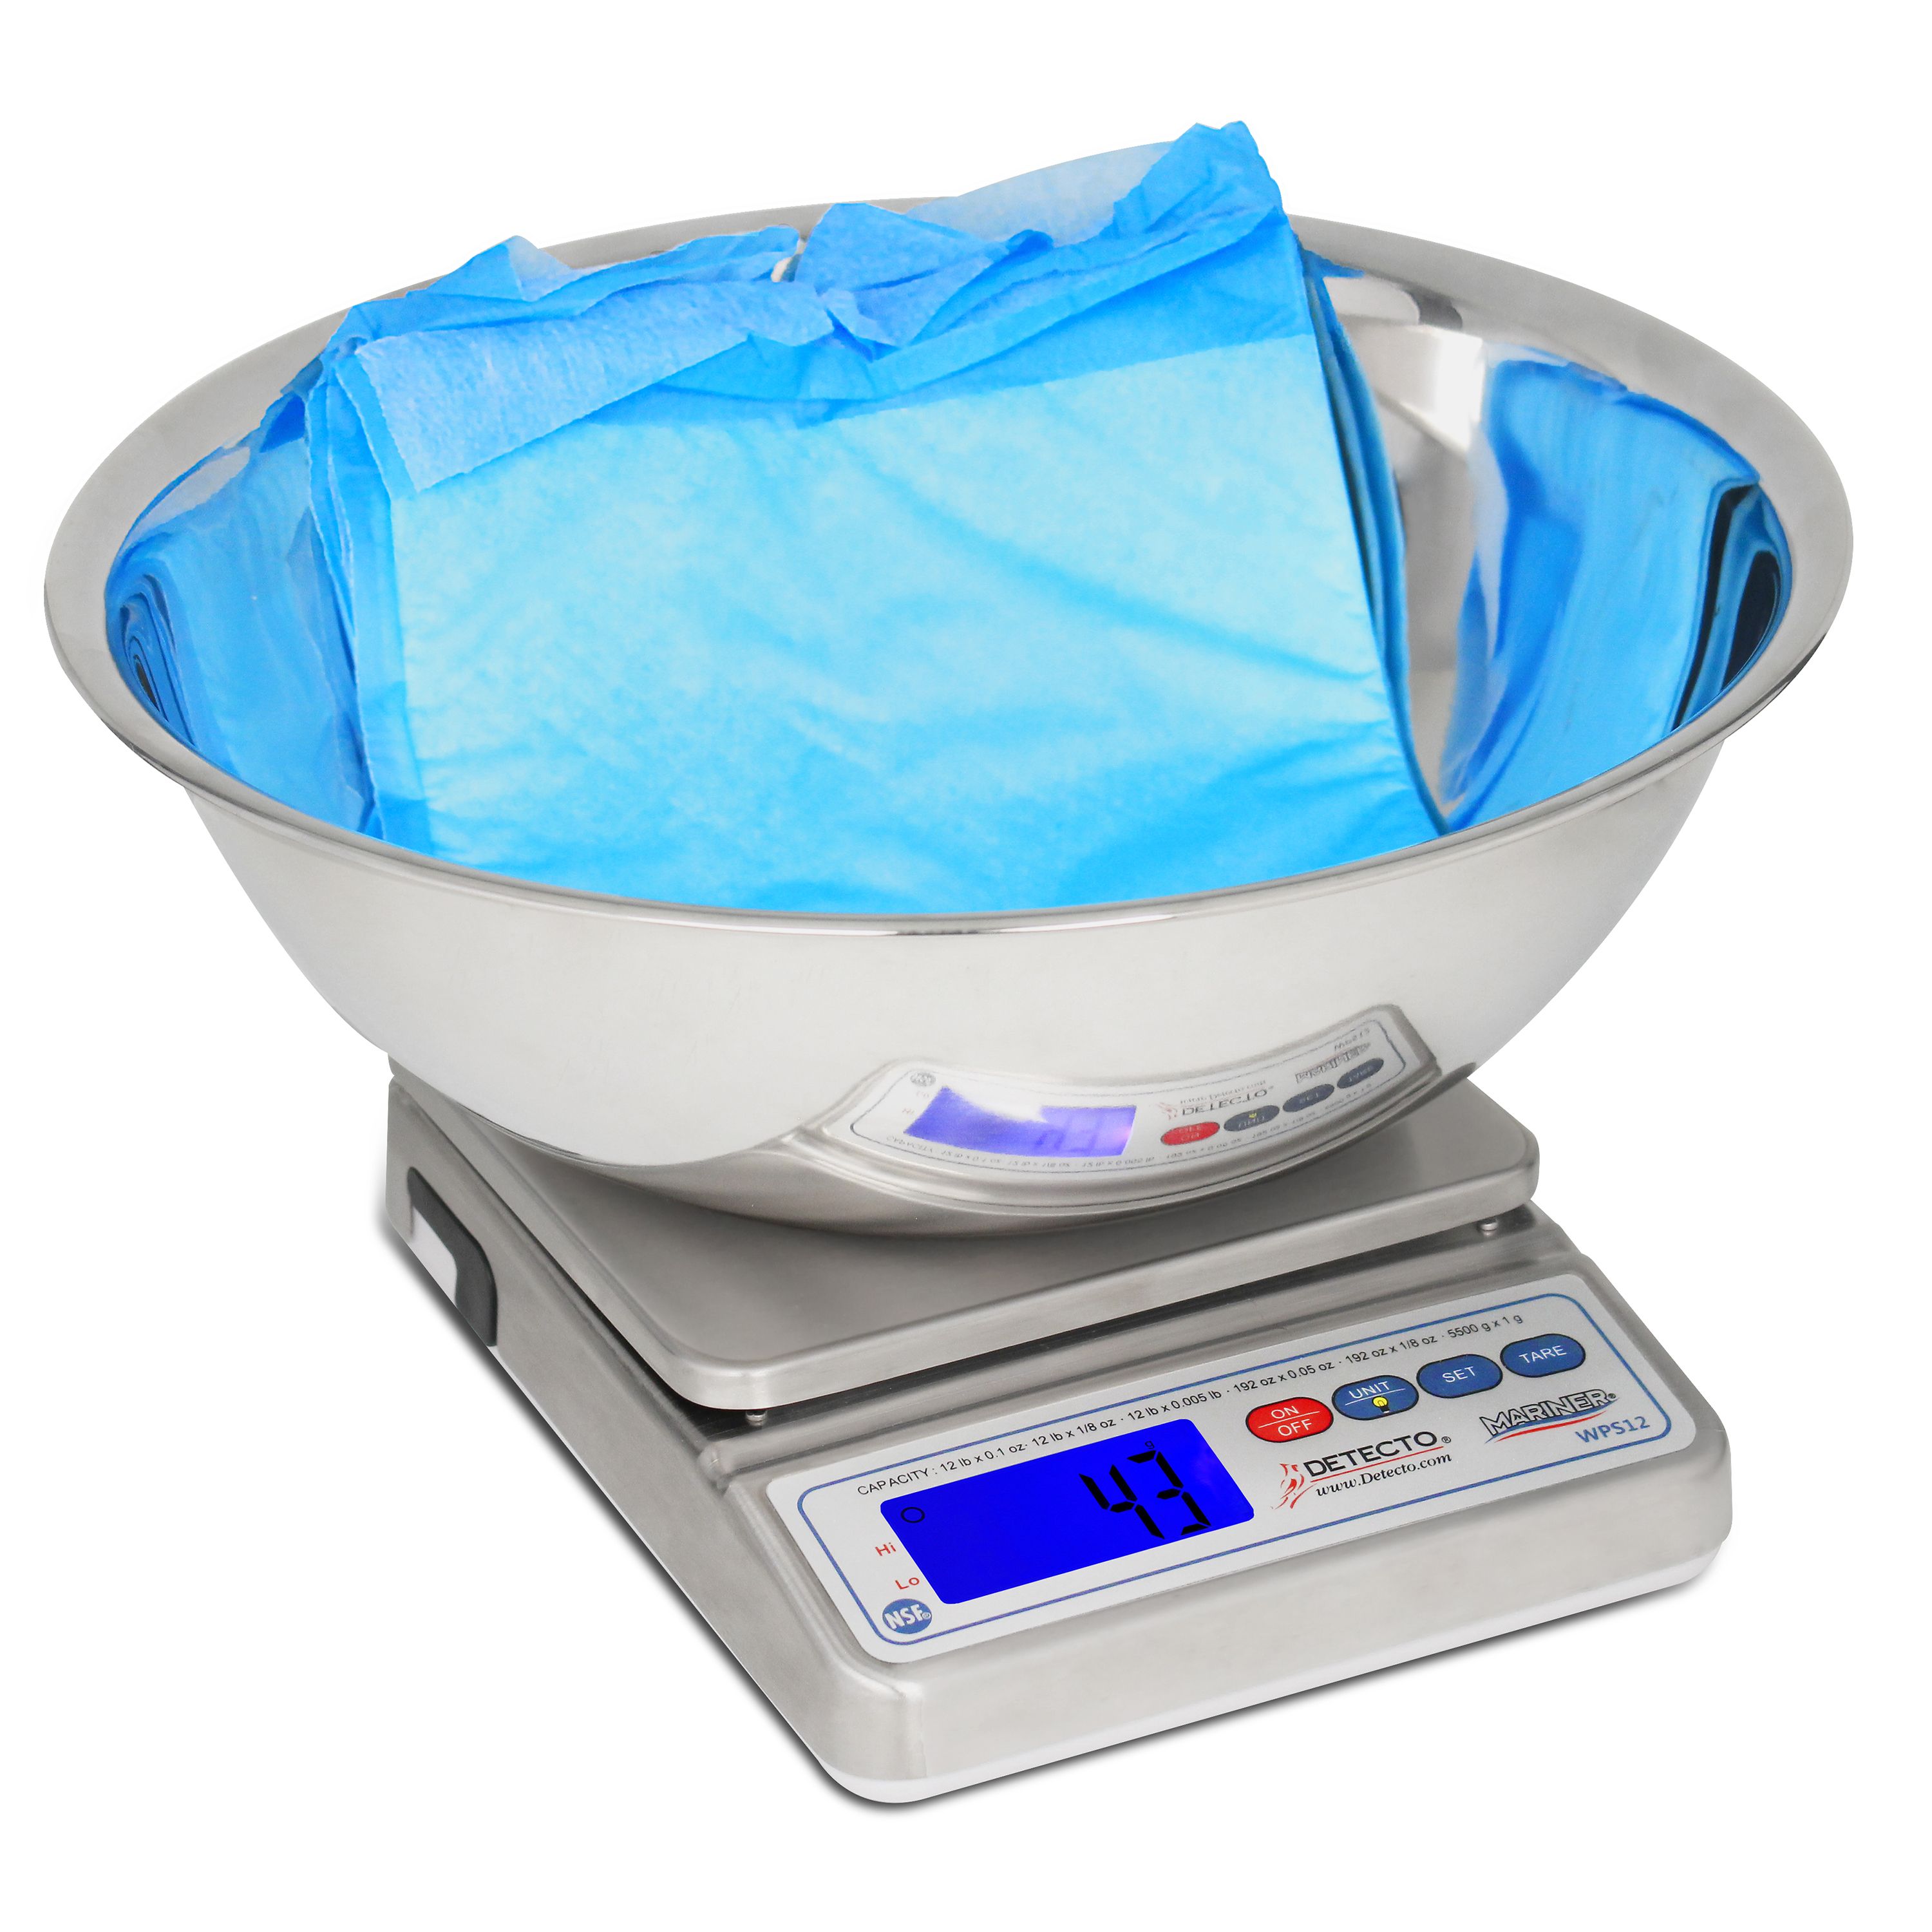 Detecto Digital Scale with Utility Bowl